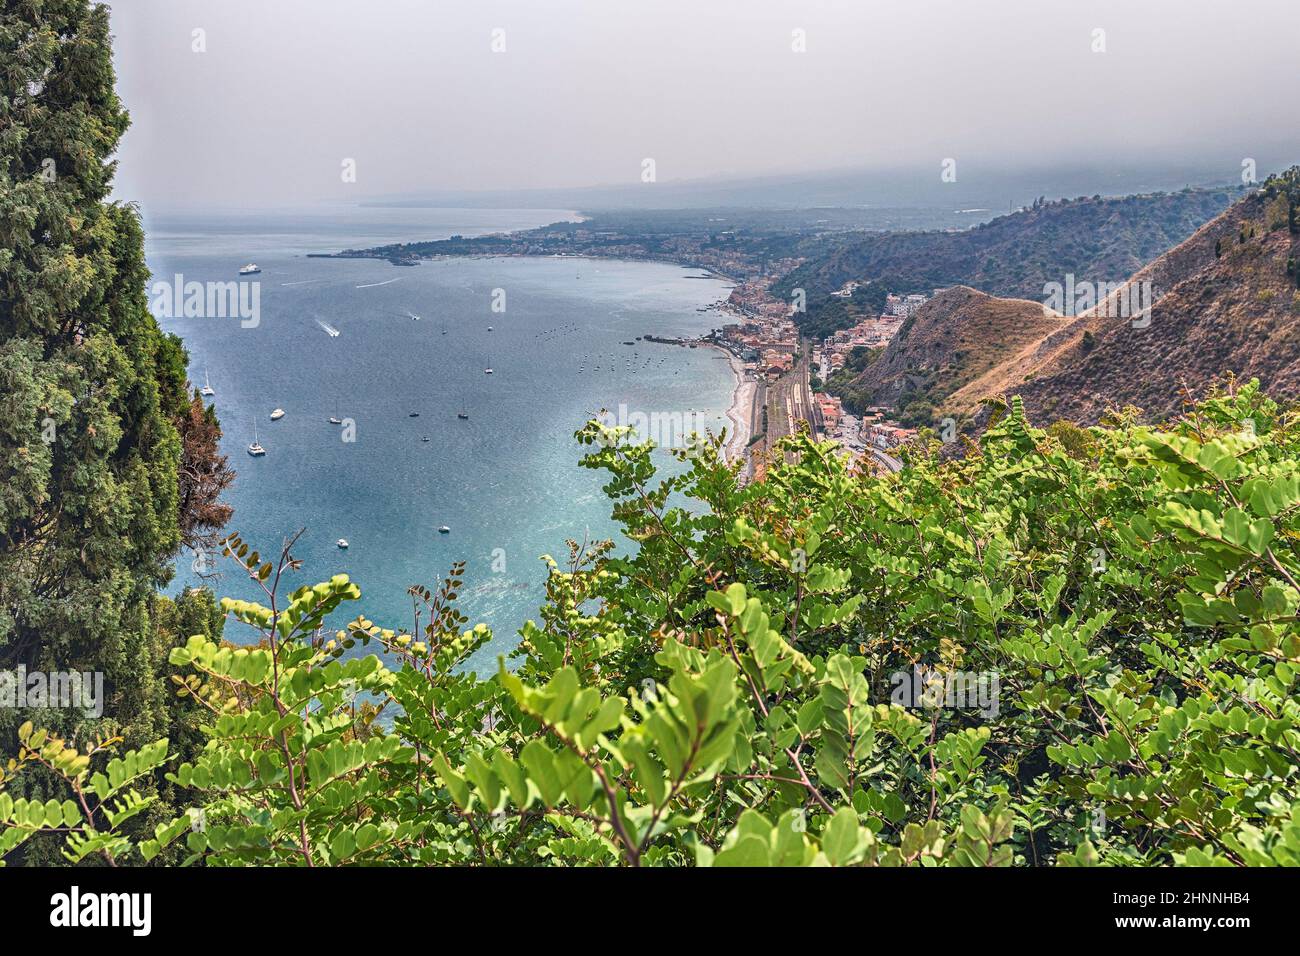 Aerial view of the scenic waterfront of Taormina, Sicily, Italy Stock Photo